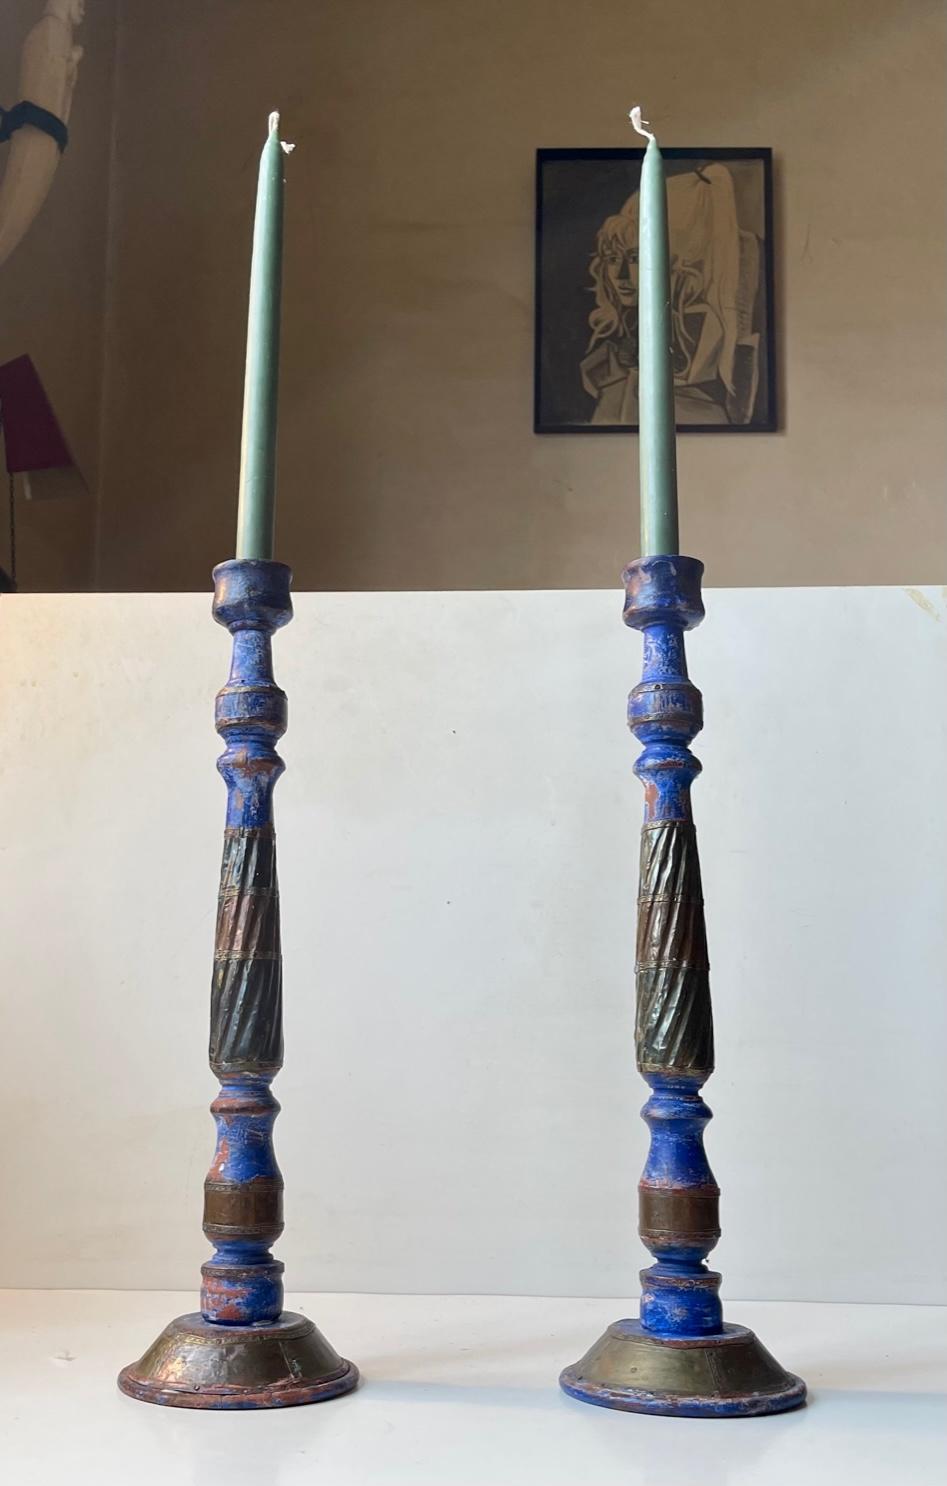 Decorative pair of large wooden candleholders in rustic paint and partially dressed with mixed metals. Probably made in Asia circa 1970-90. They are to be fitted with regular sized candles. Measurements: H: 42 cm, Diameter: 12 cm (base).